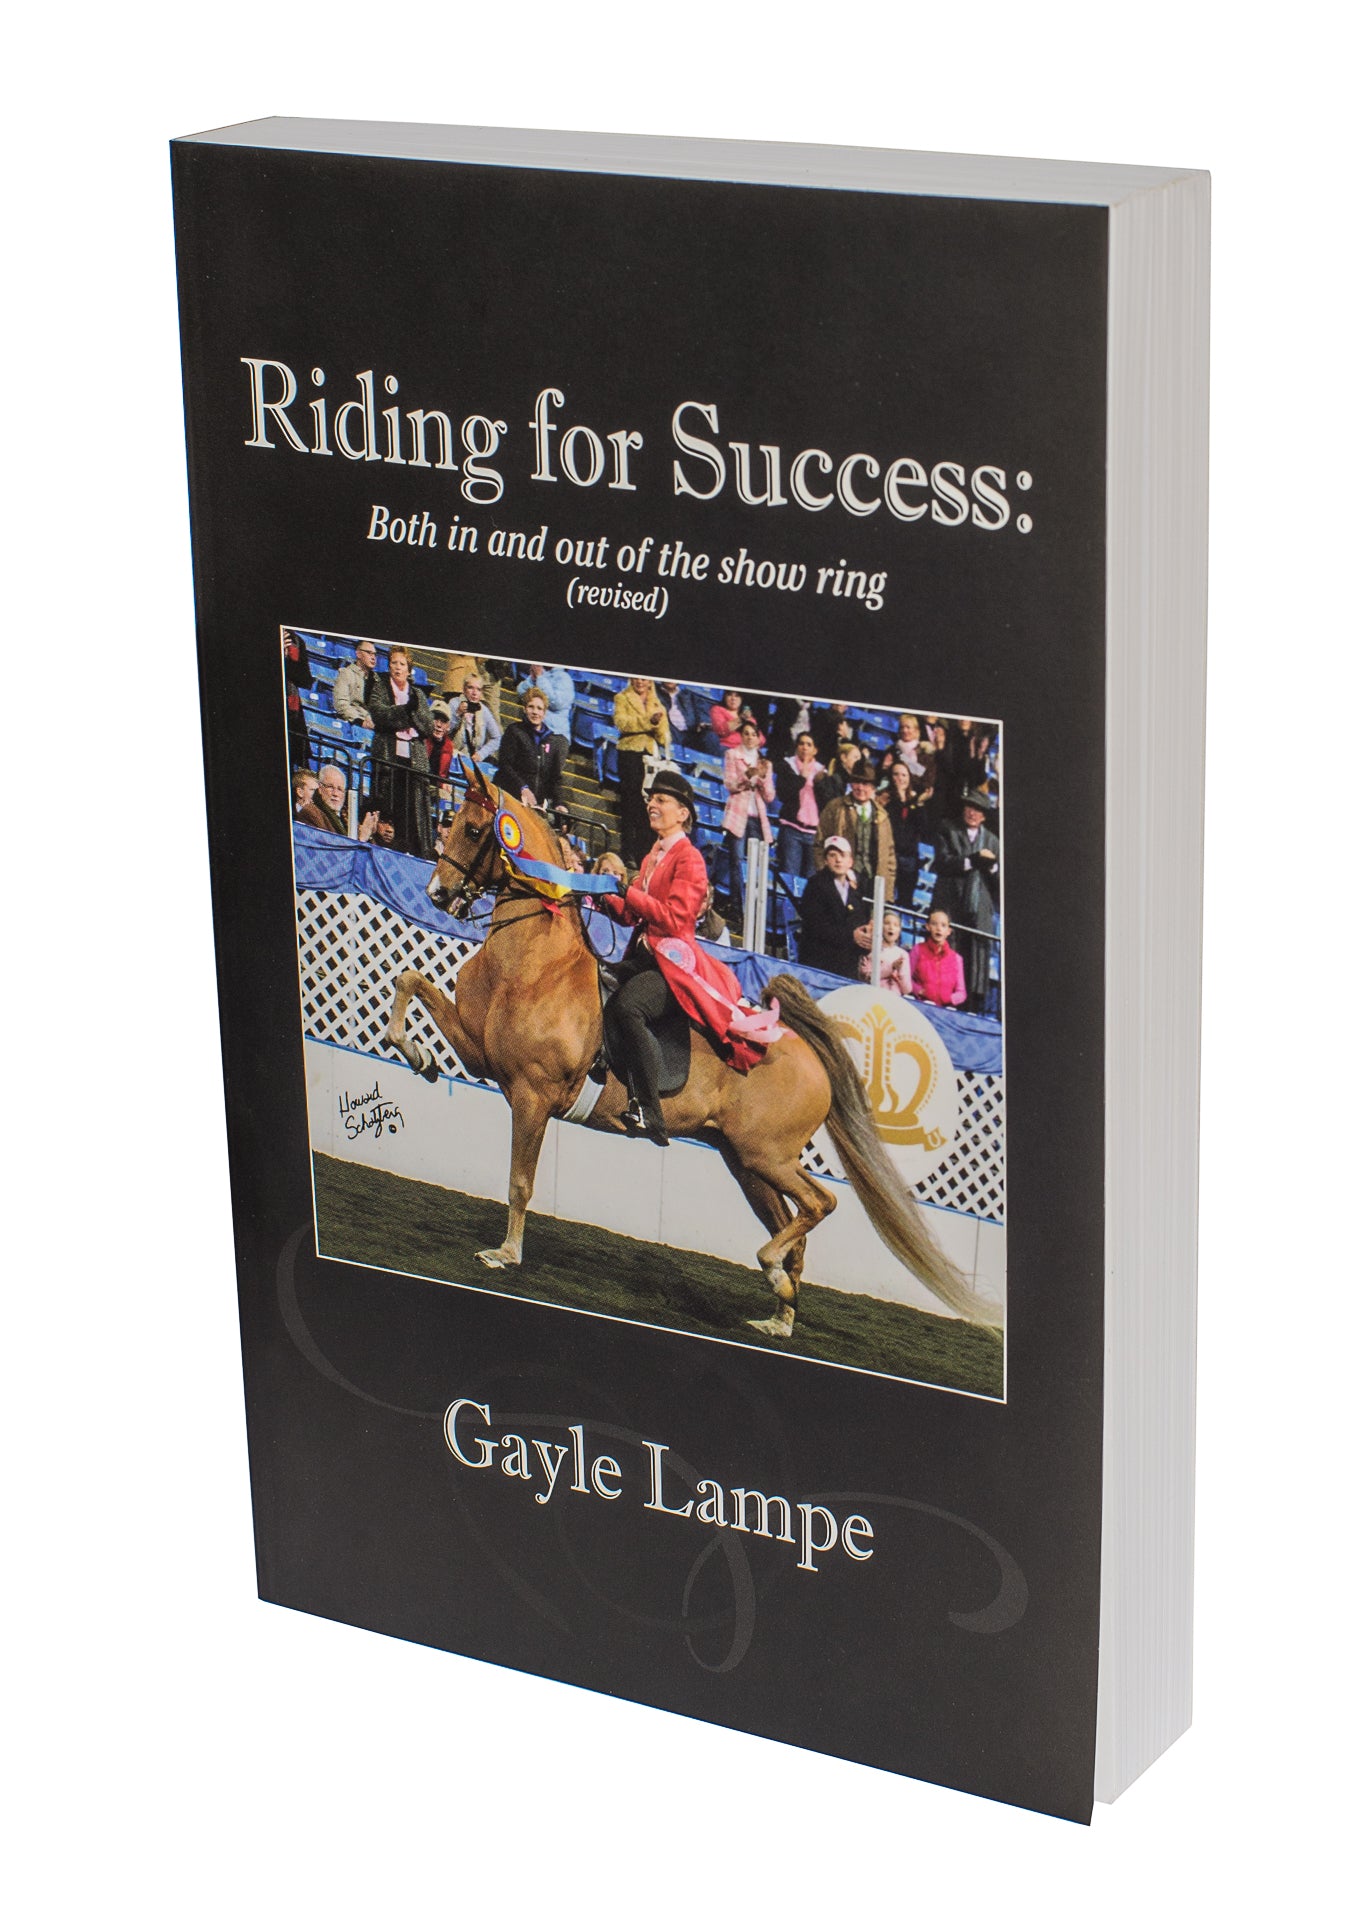 Riding for Success Both in and out of the show ring revised